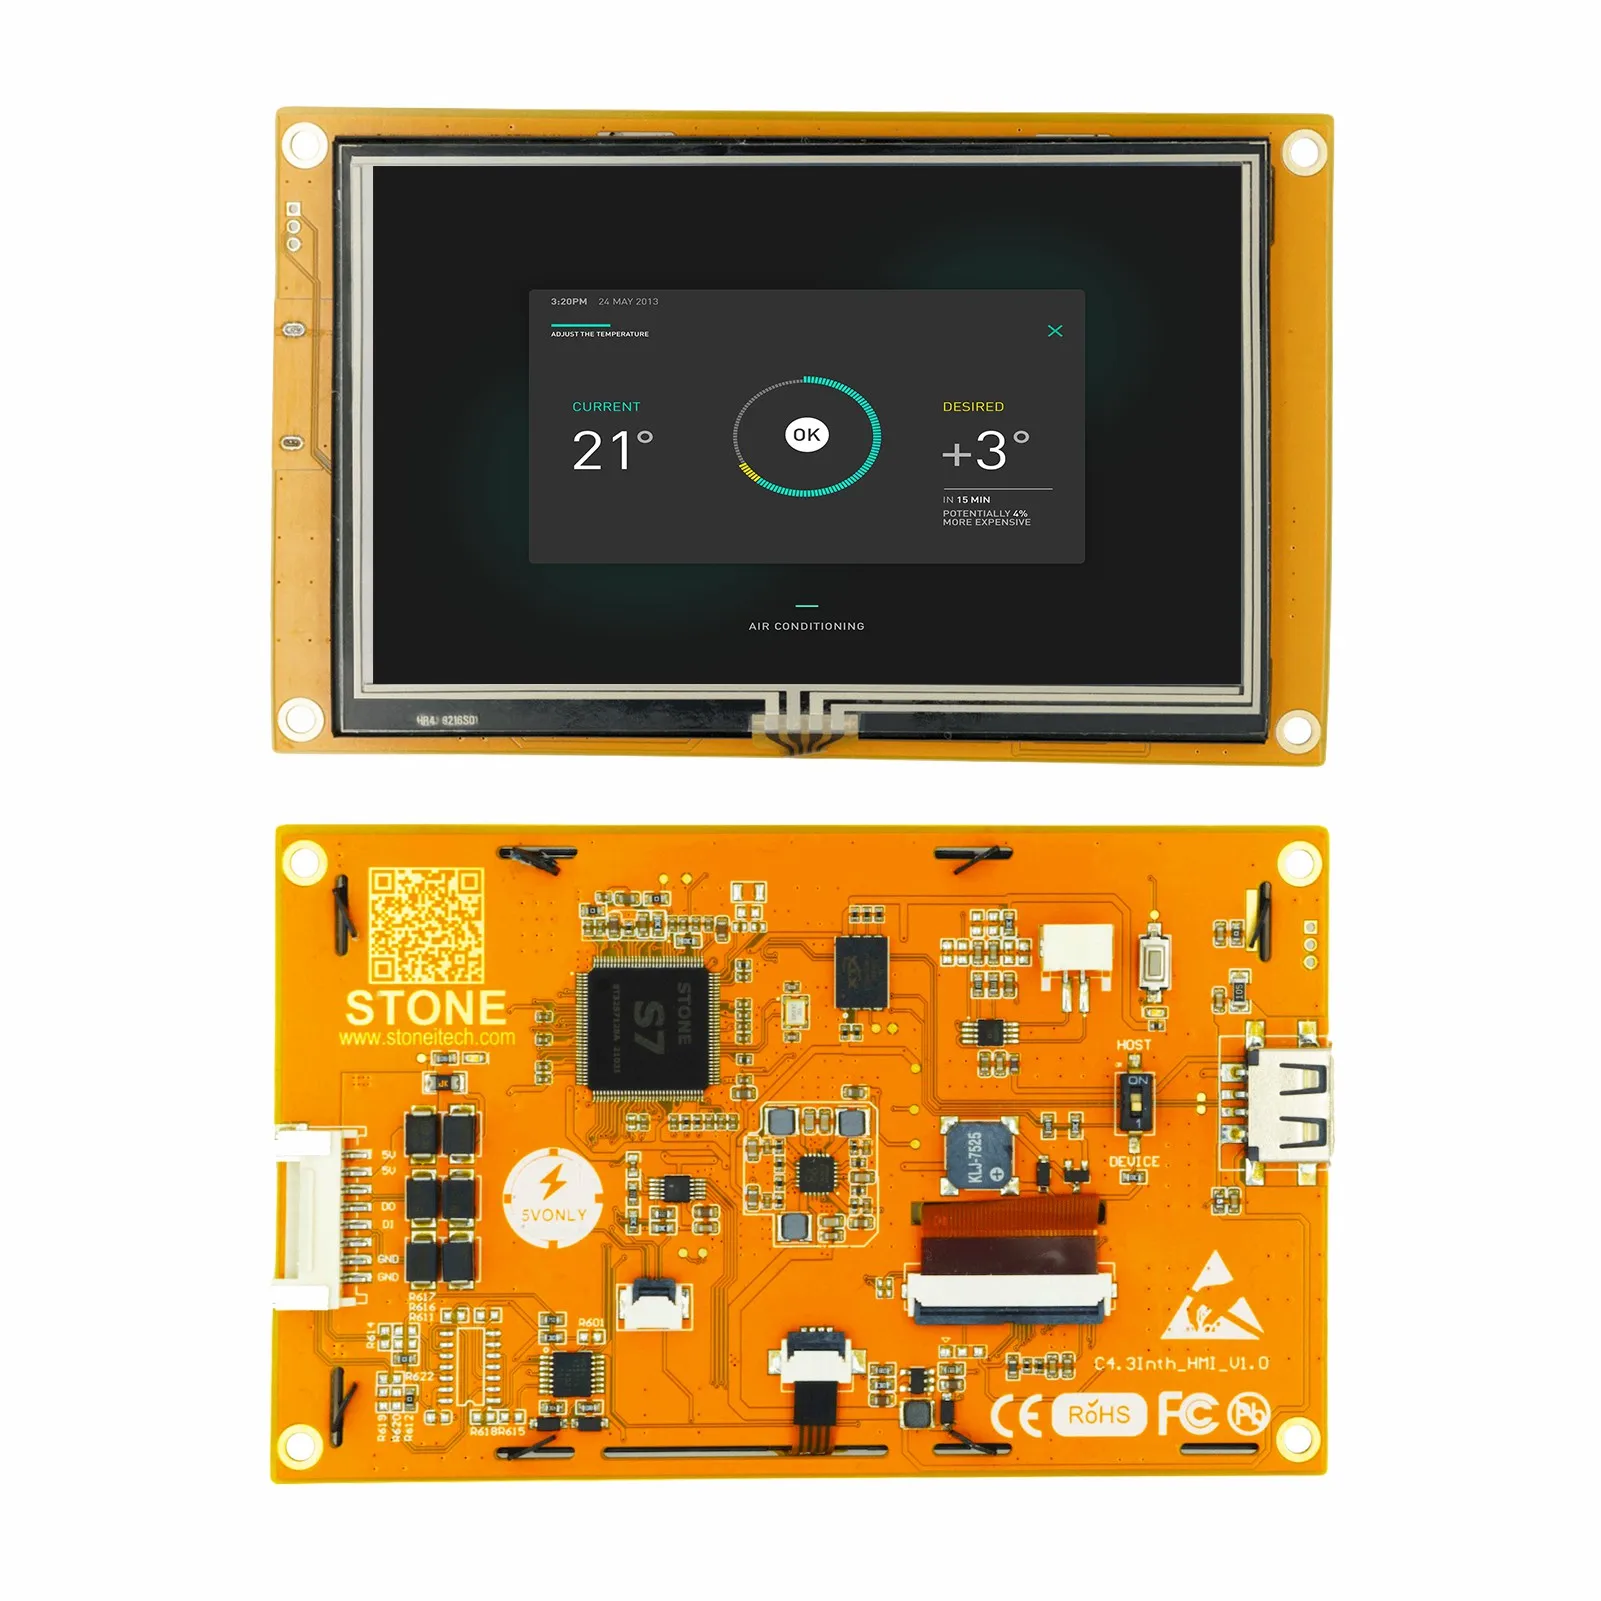 4.3 Inch 480x272 HMI TFT LCD RGB 262K Touch Panel with Controller Board + Driver + GUI Software + UART Port